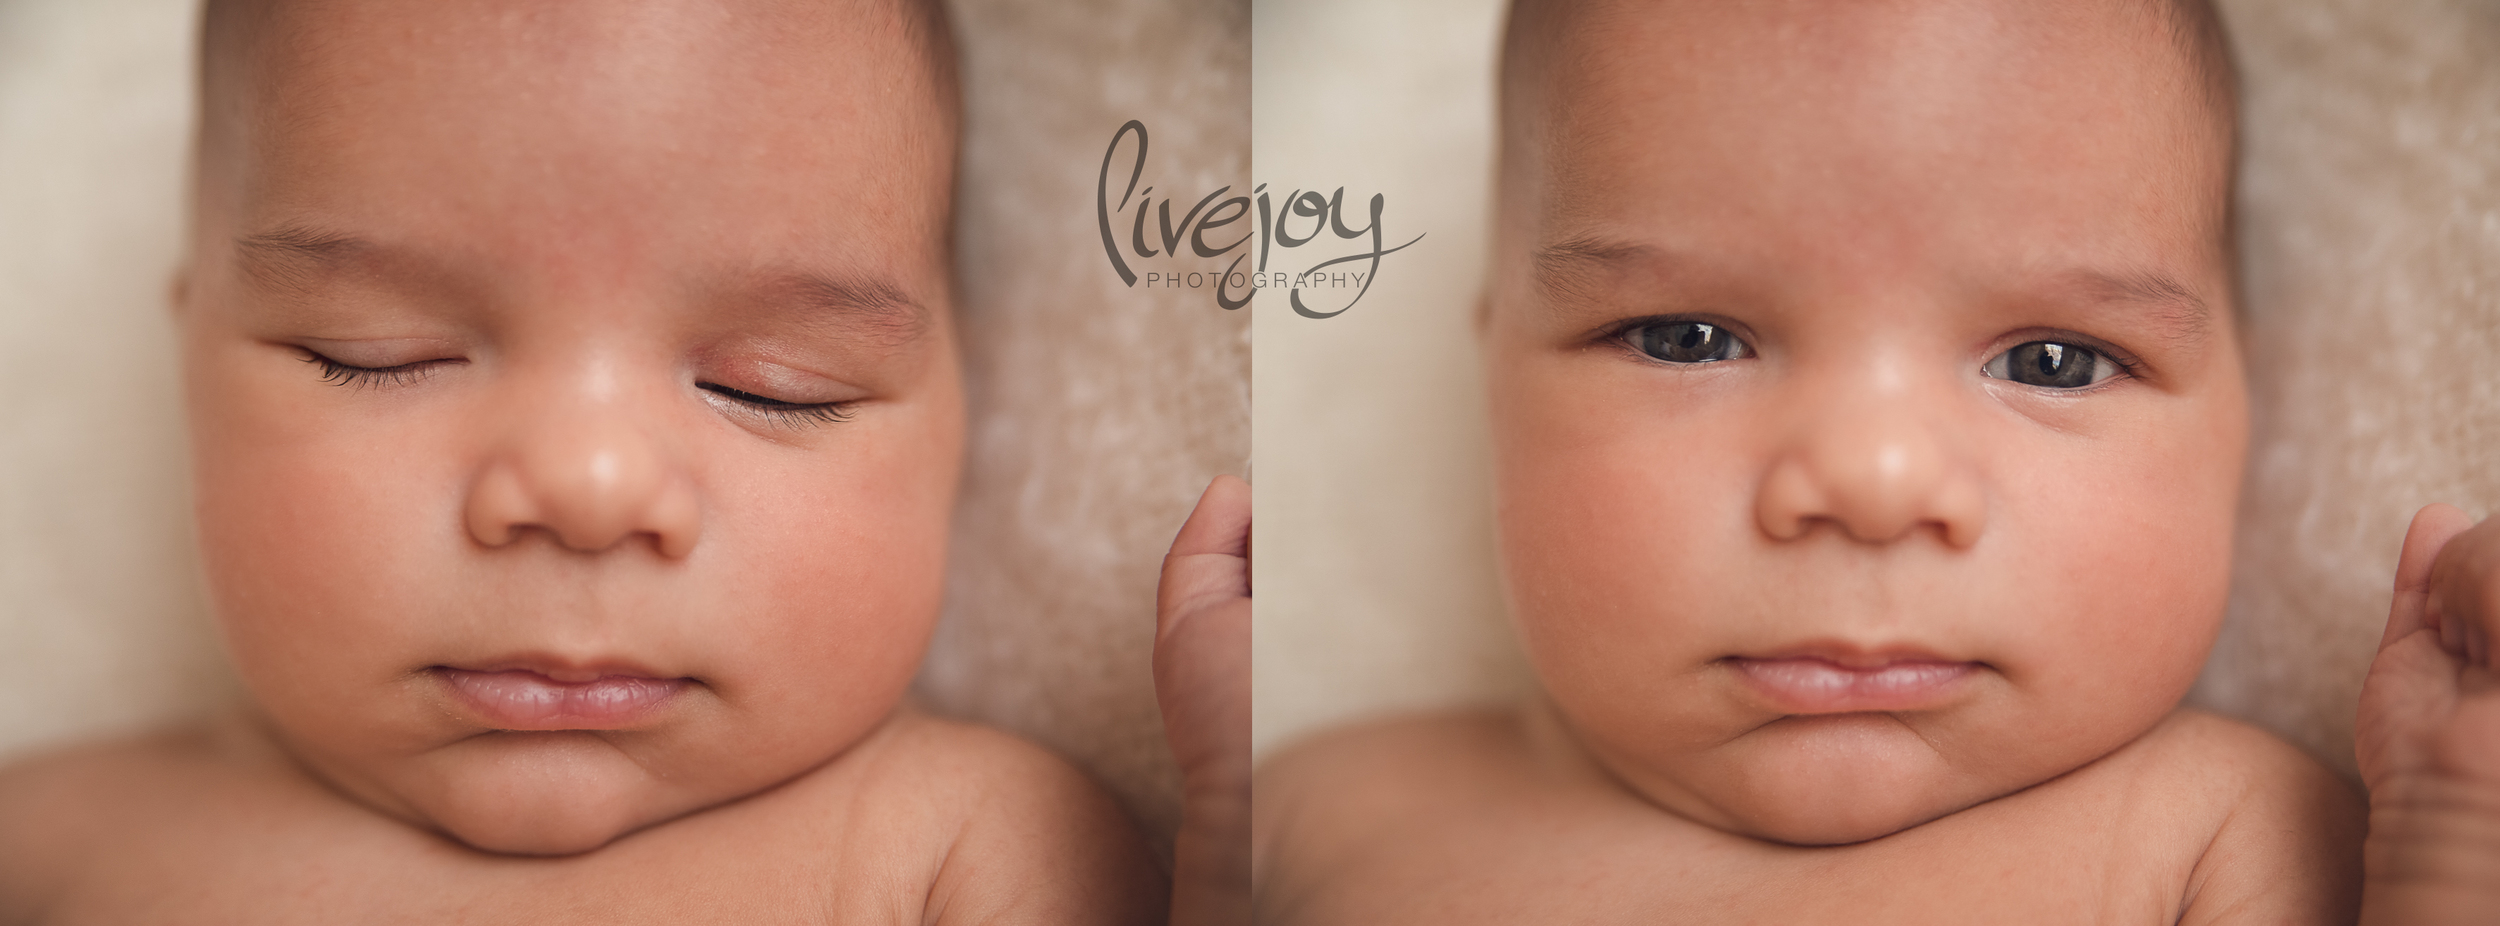 One Month Baby Photography | LiveJoy Photography | Oregon